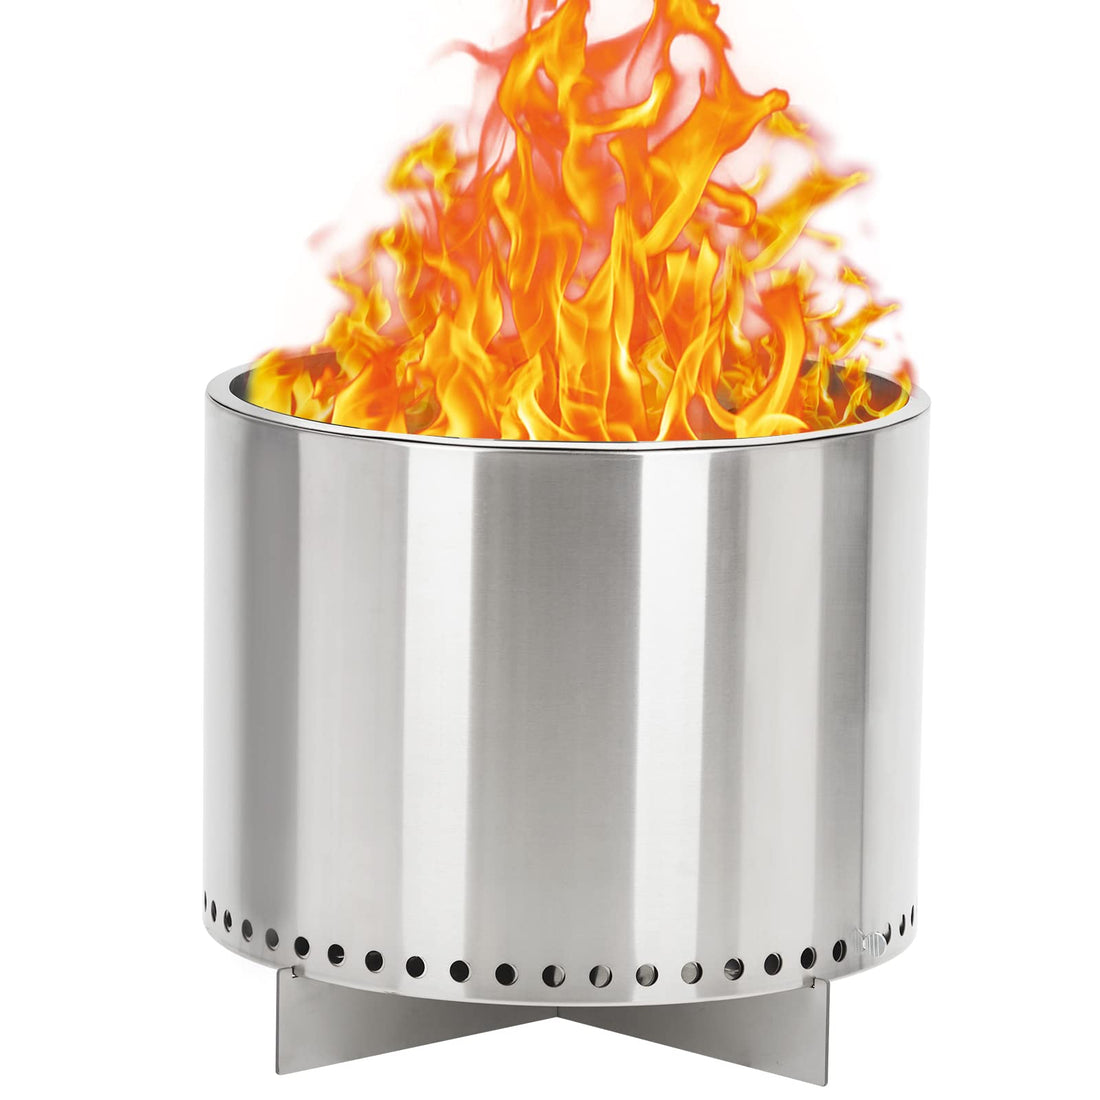 16.5 Inch Smokeless Wood Burning Fire Pit, Stainless Steel